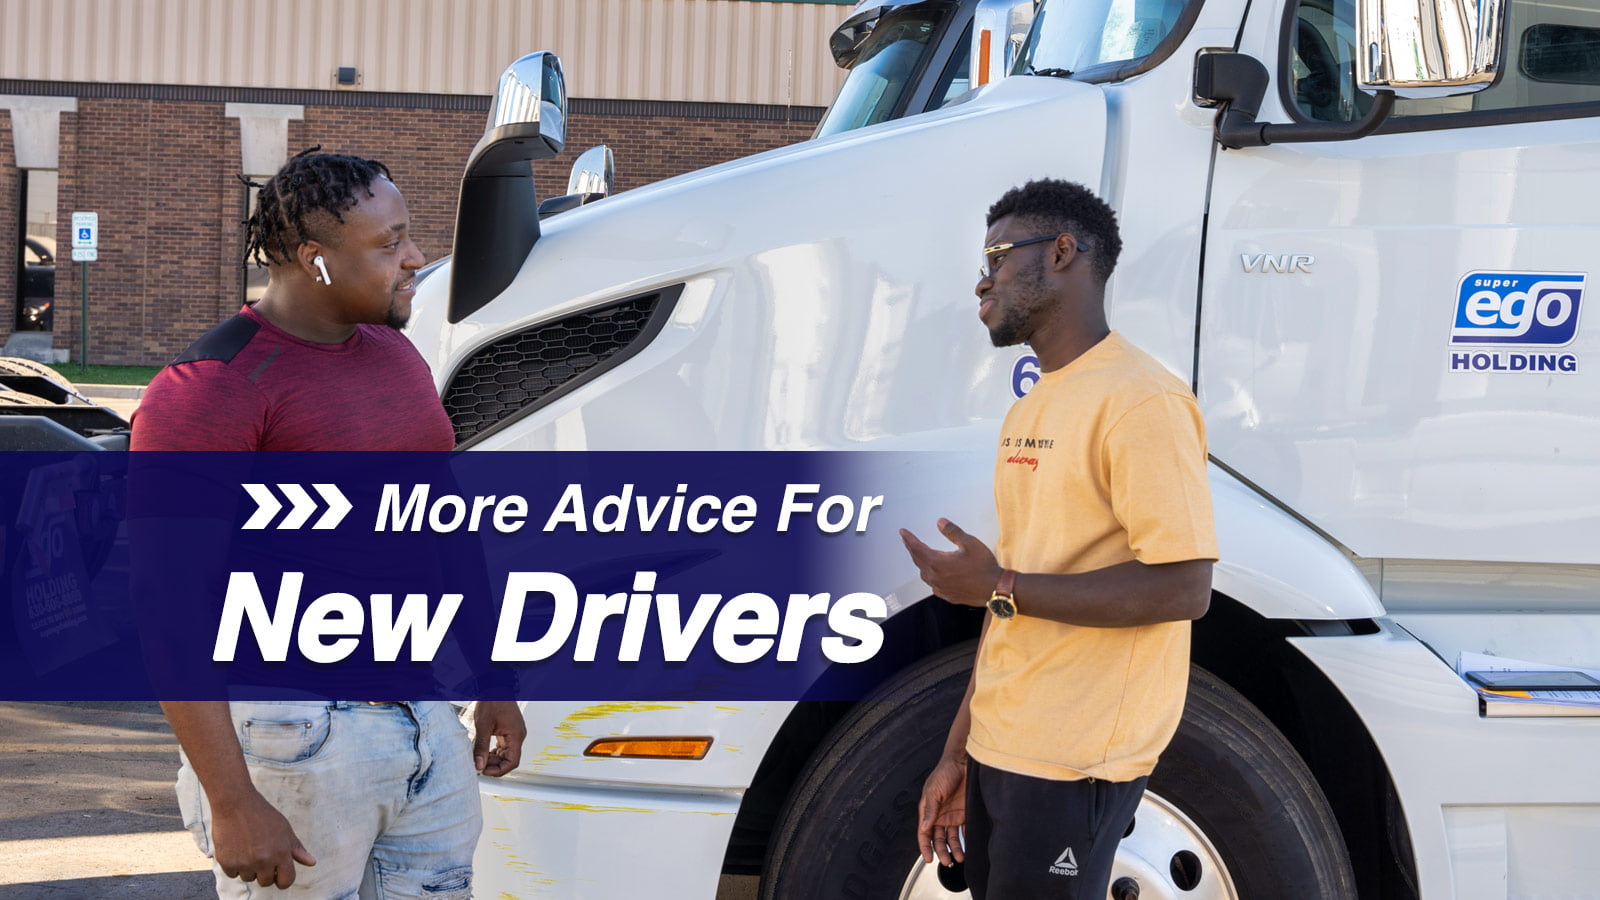 More advice for new drivers